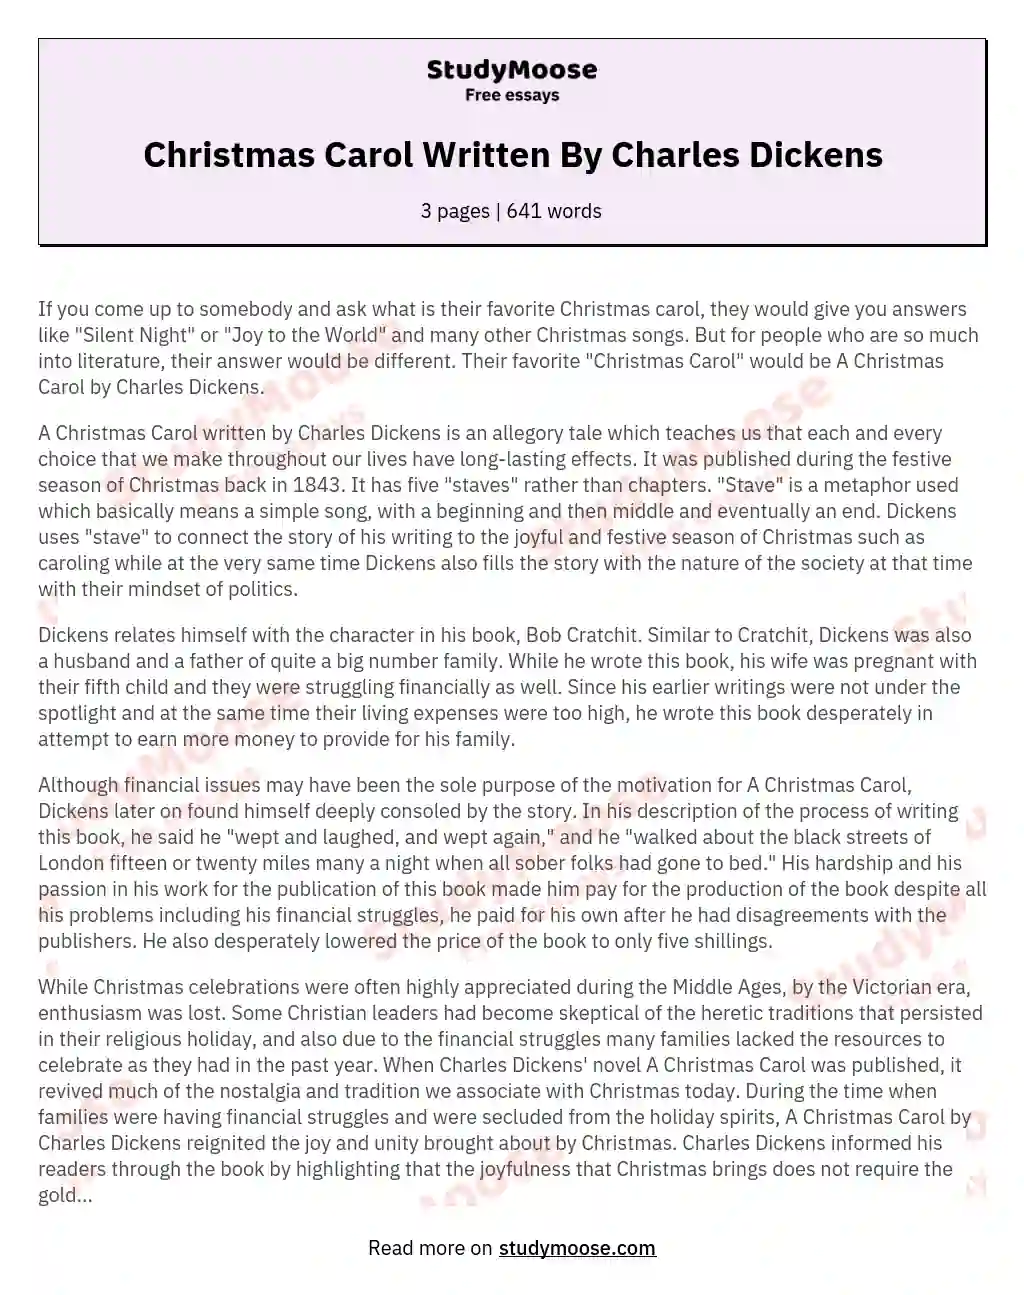 Christmas Carol Written By Charles Dickens